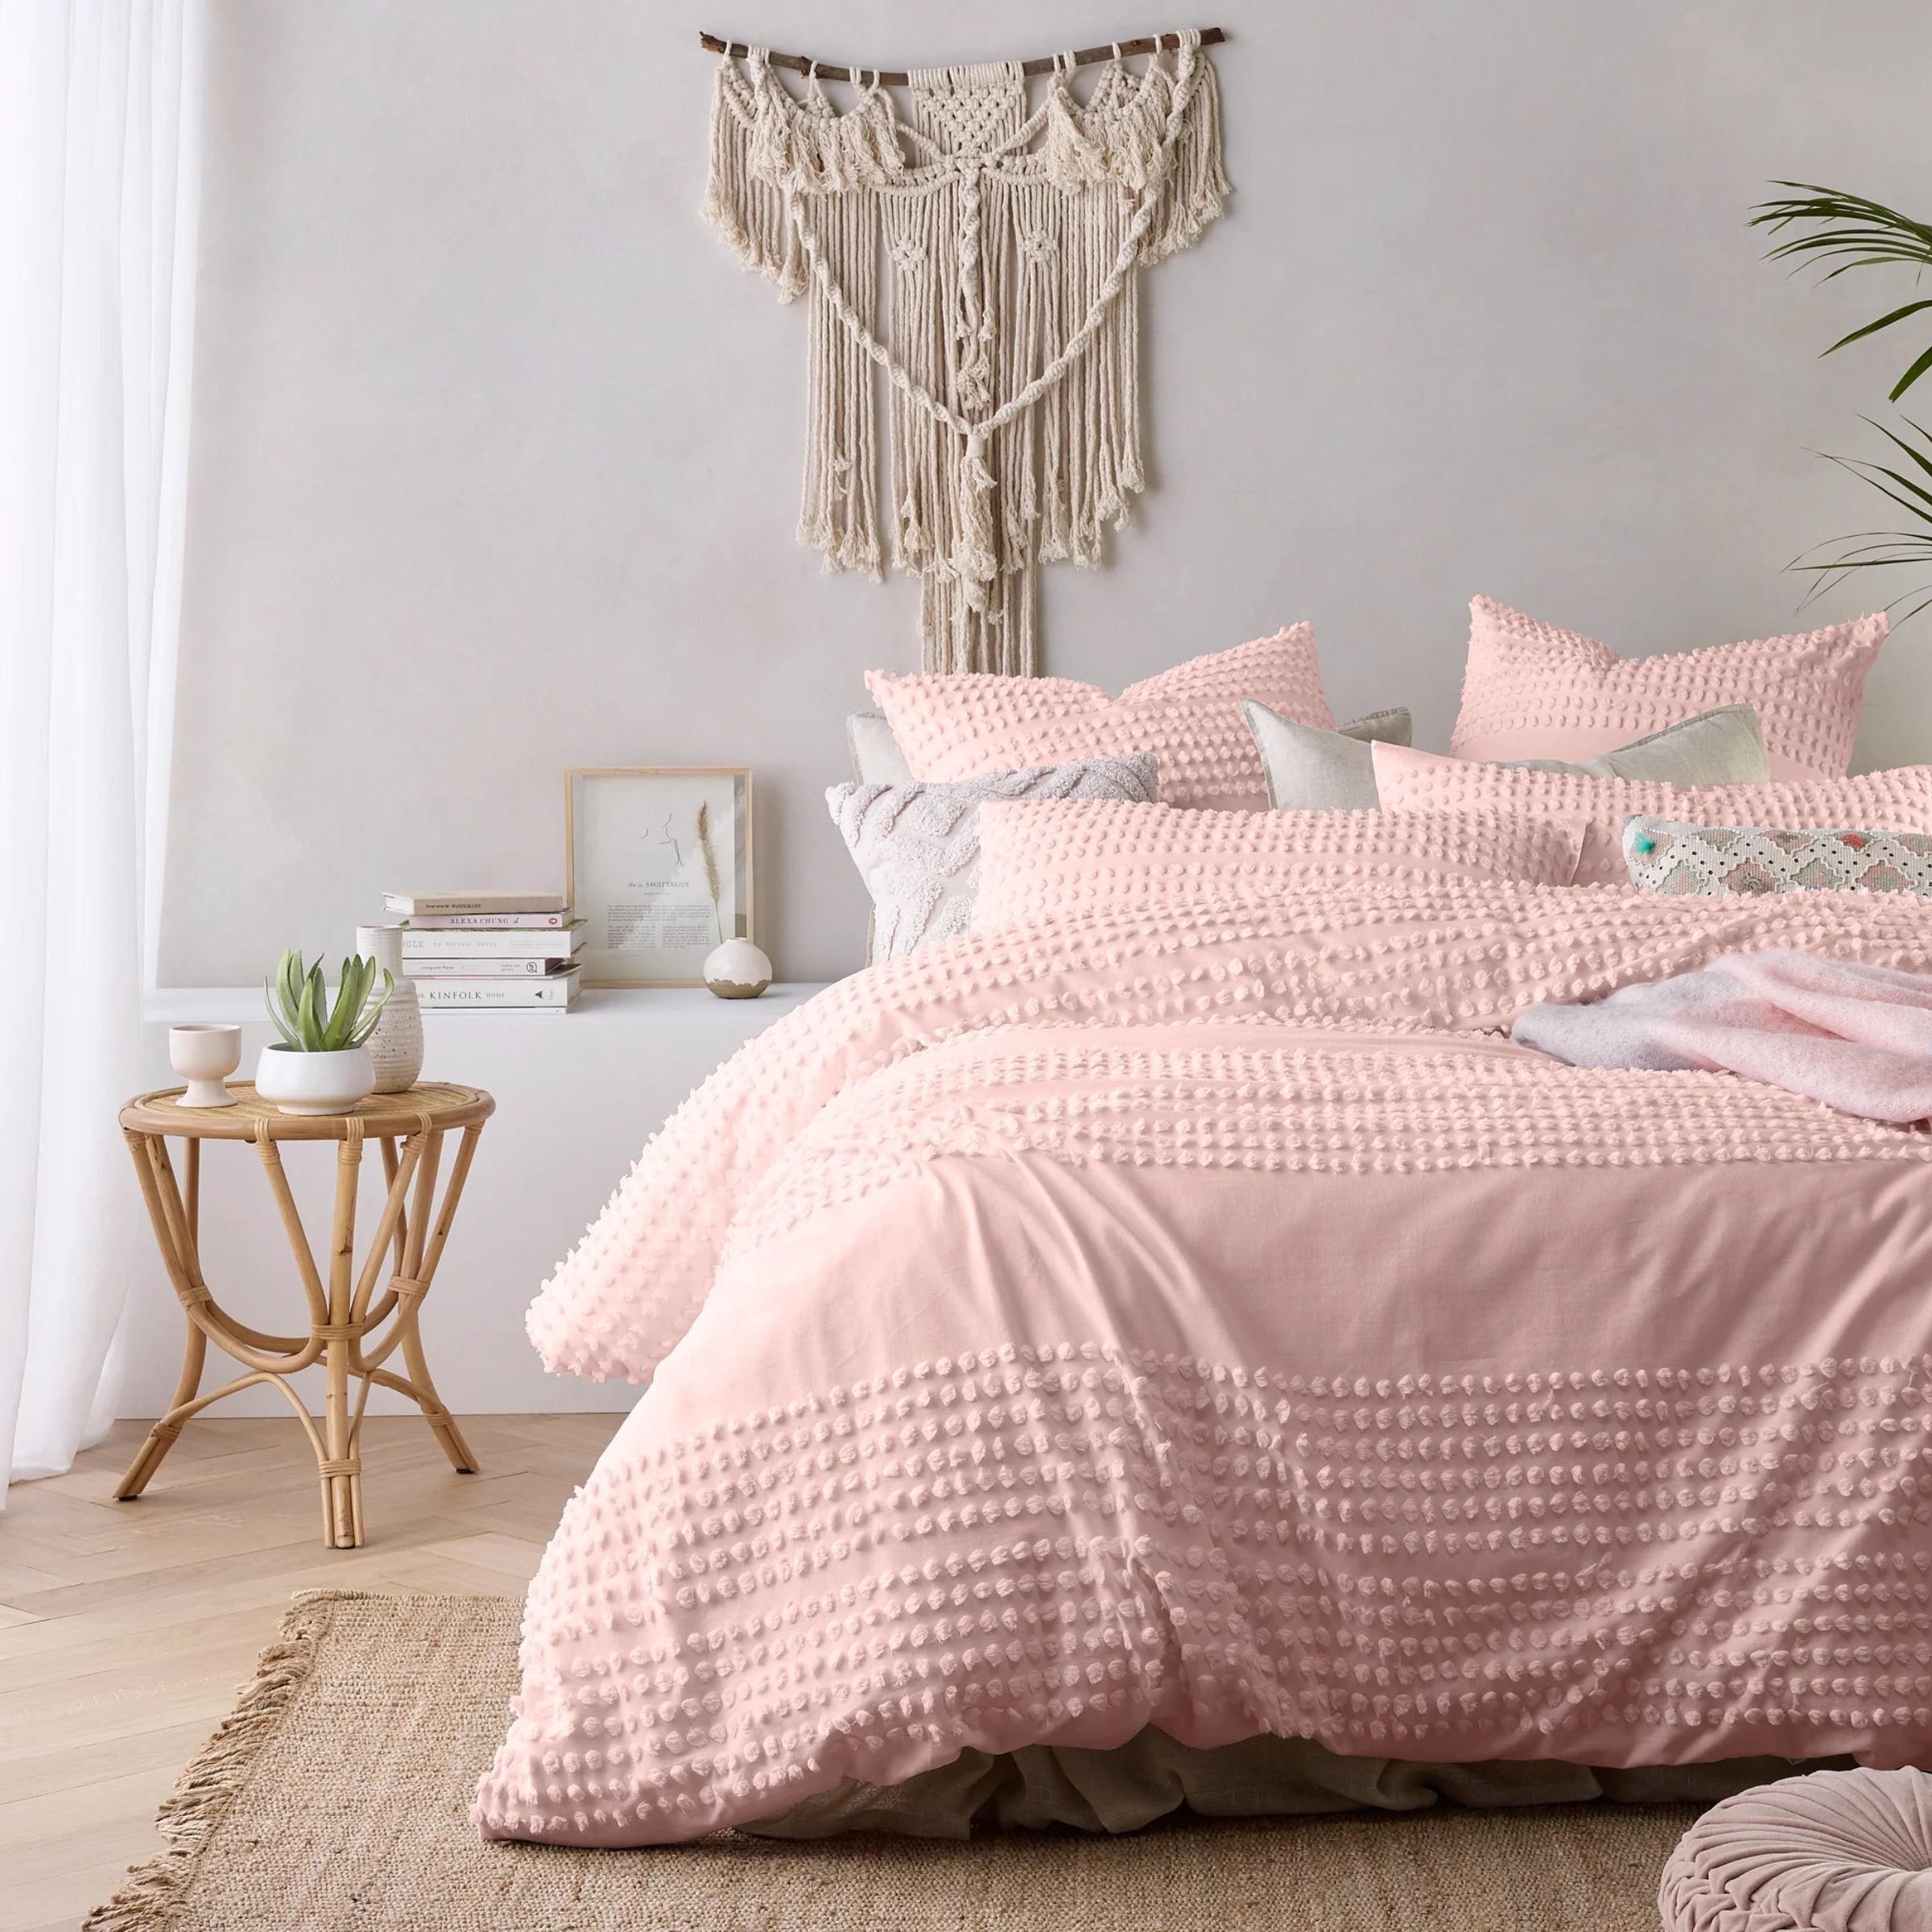 Elegant Betty Blush Single Quilt Cover Set in a cozy bedroom setting.